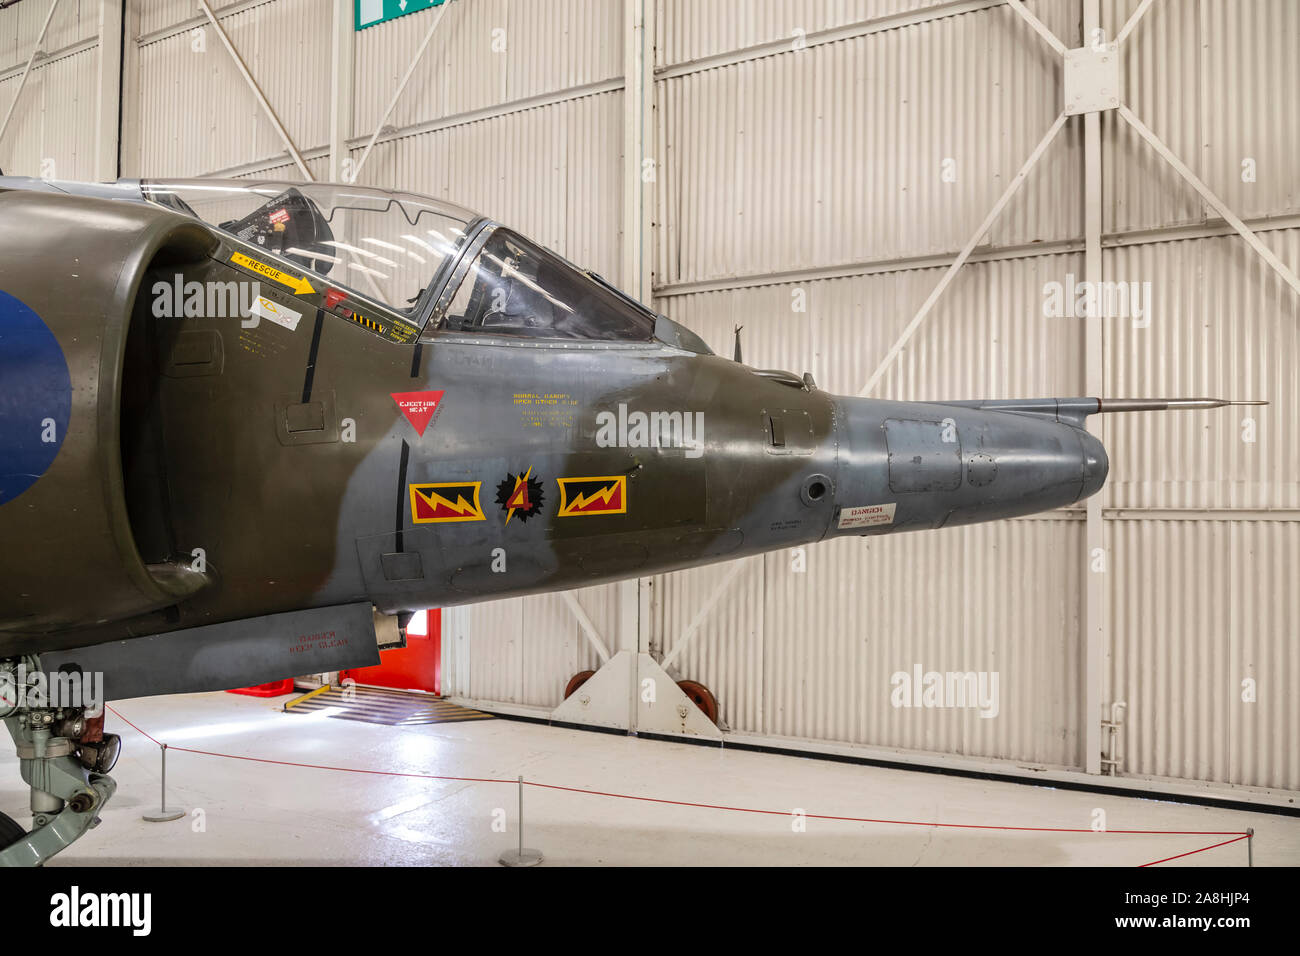 Hawker Harrier on Display in RAF Museum Cosford, Having Seen Action During Falklands War Stock Photo